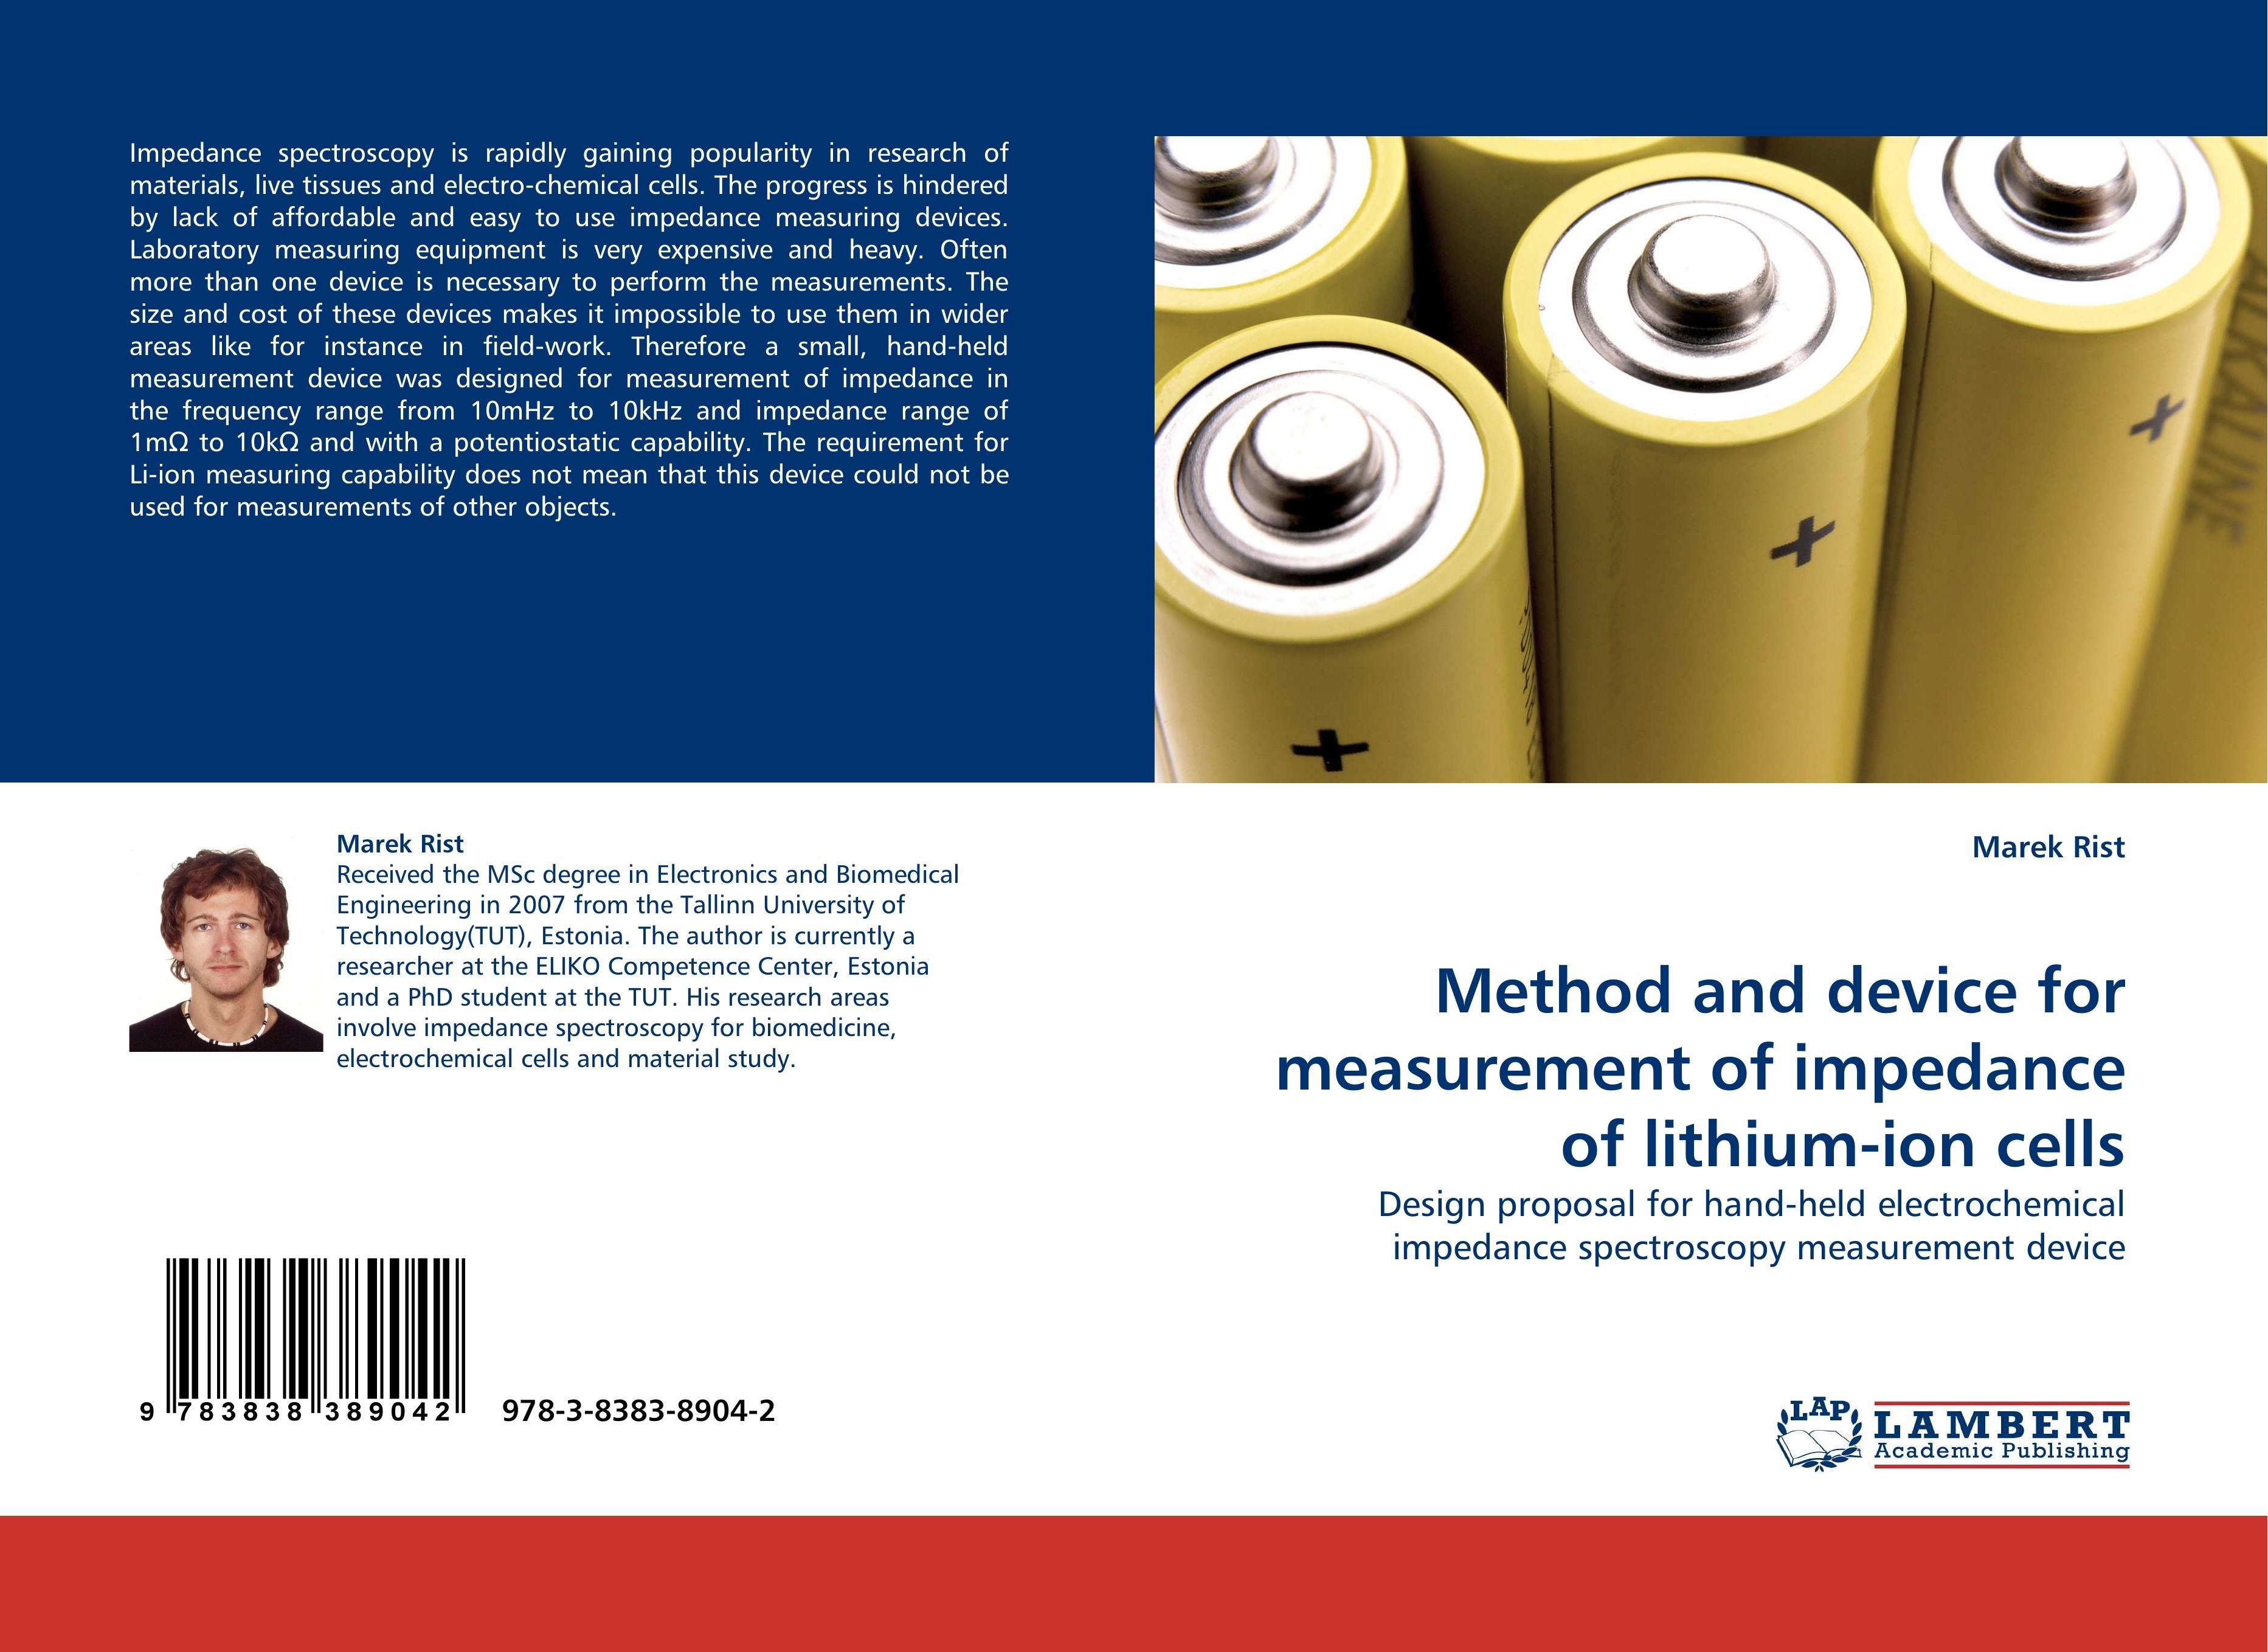 Method and device for measurement of impedance of lithium-ion cells / Design proposal for hand-held electrochemical impedance spectroscopy measurement device / Marek Rist / Taschenbuch / Paperback - Rist, Marek